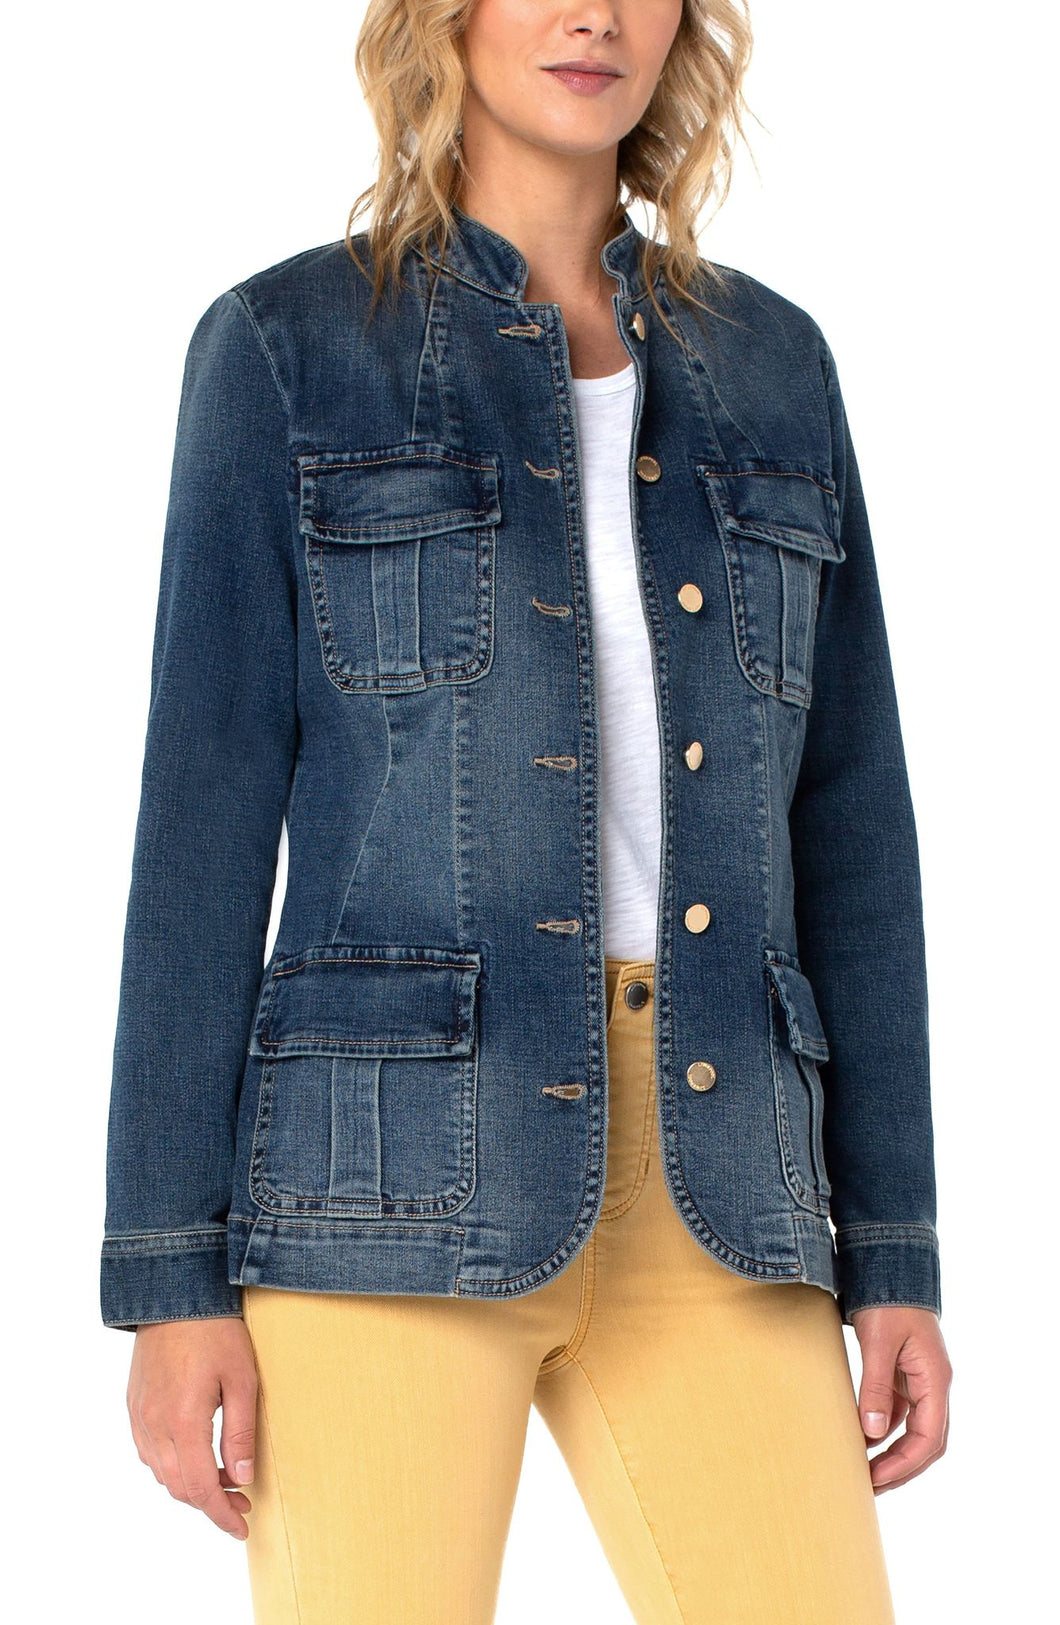  A fantastic length to this jacket allows it to go well with so many outfits!  Imagine it paired with white jeans, any color/print pant and every style of dress.  The eye-catching details on the Annie makes this denim jacket stand out among other jackets. The patch pockets on the front are fully functional while the buttons are a shiny gold, giving this denim jacket eye appealing detail. 